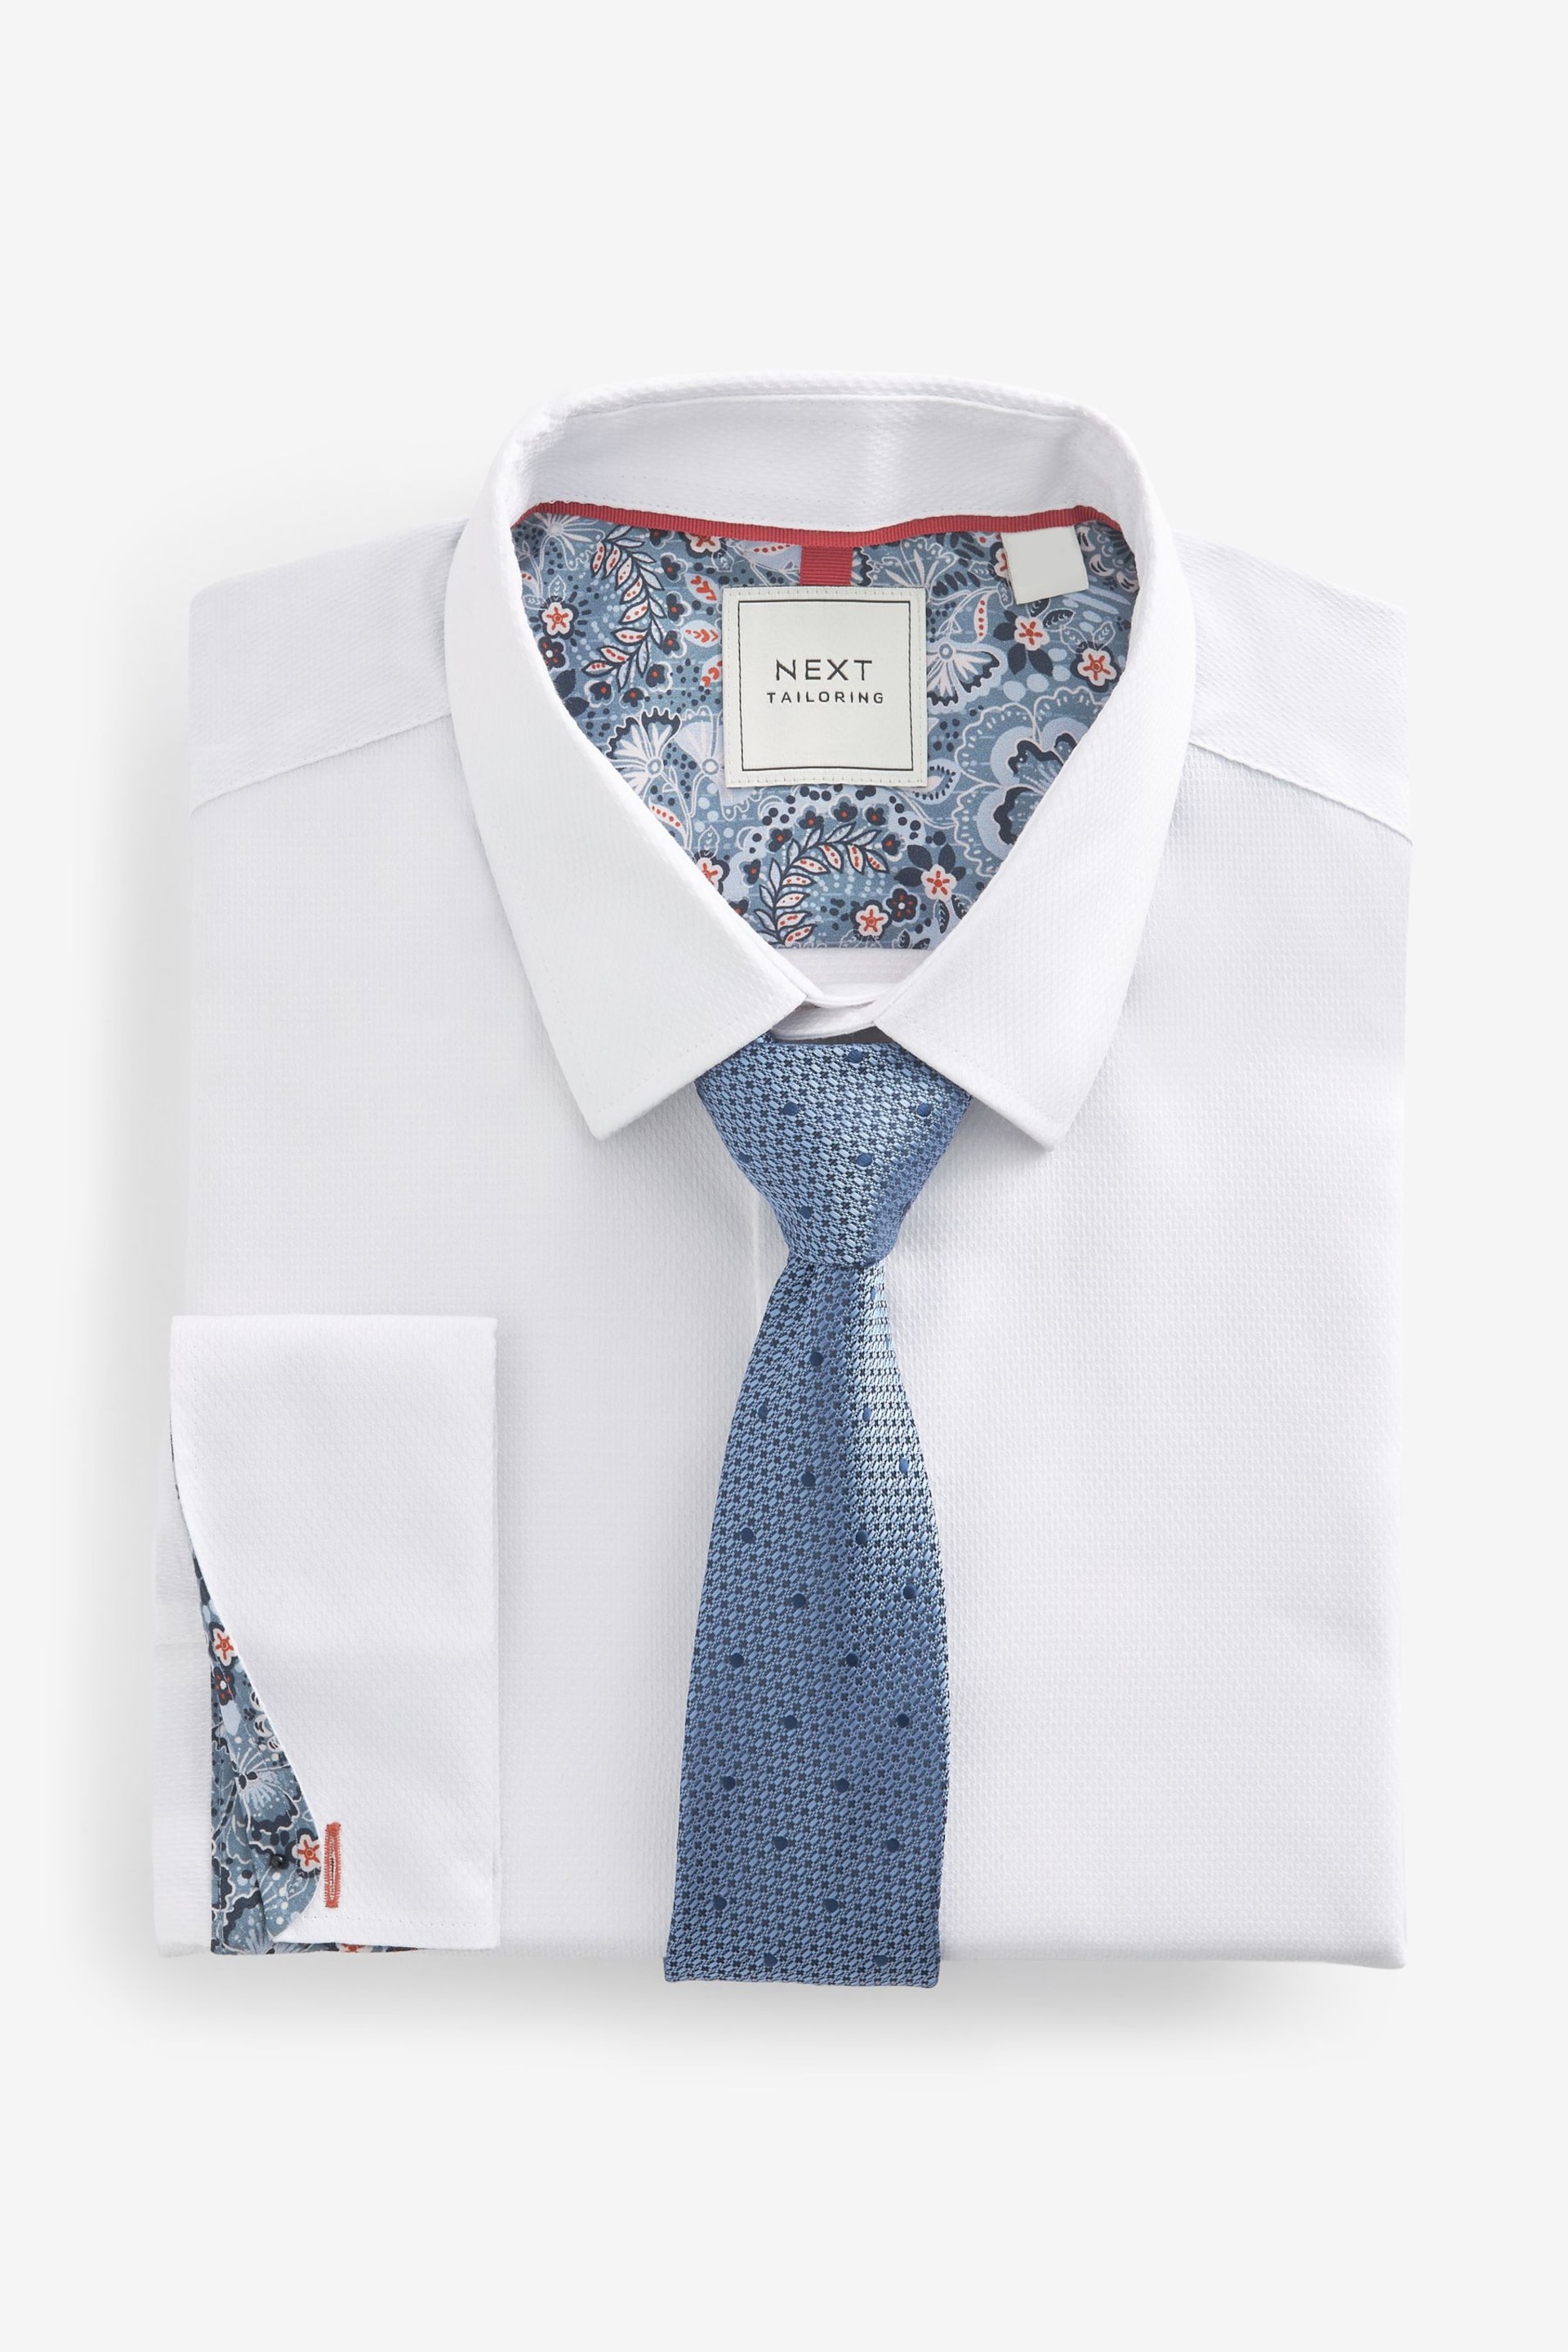 White/Blue Polka Dot Occasion Shirt And Tie Pack - Image 5 of 6